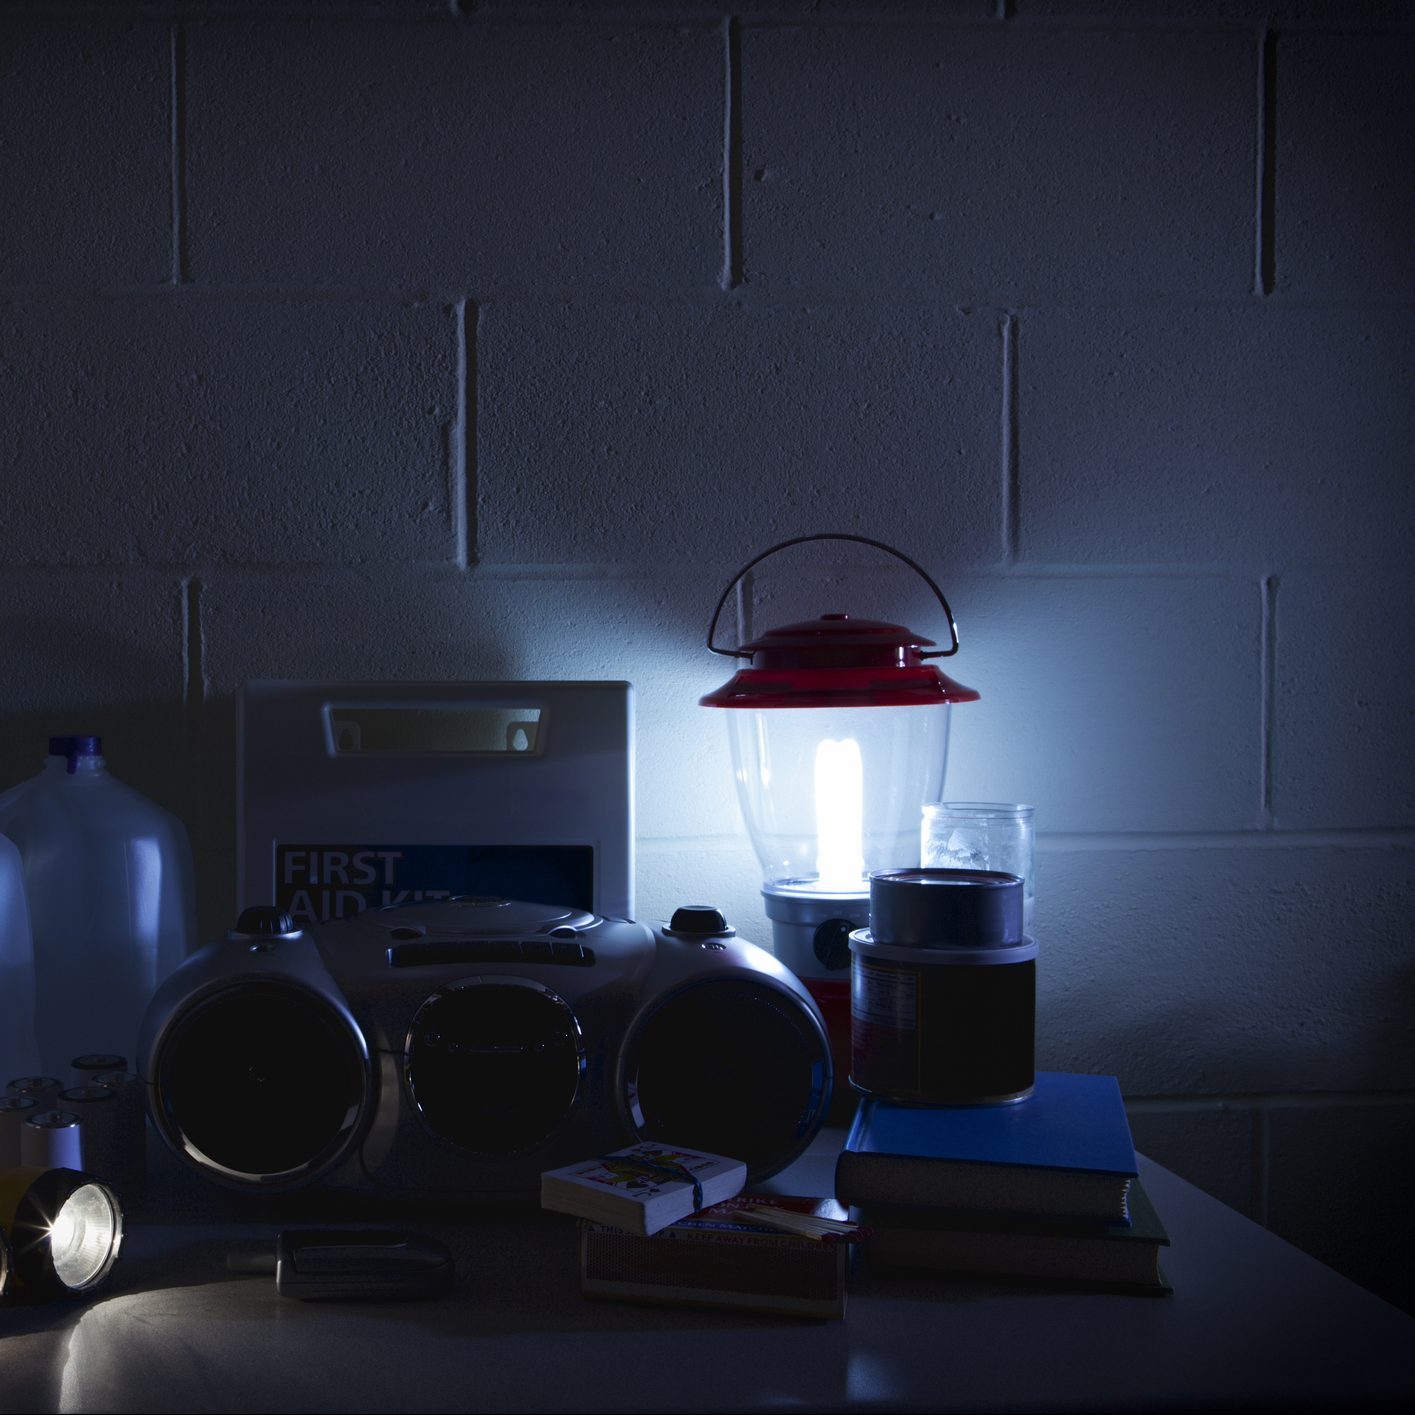 17 Essential Power Outage Supplies You Should Always Have on Hand